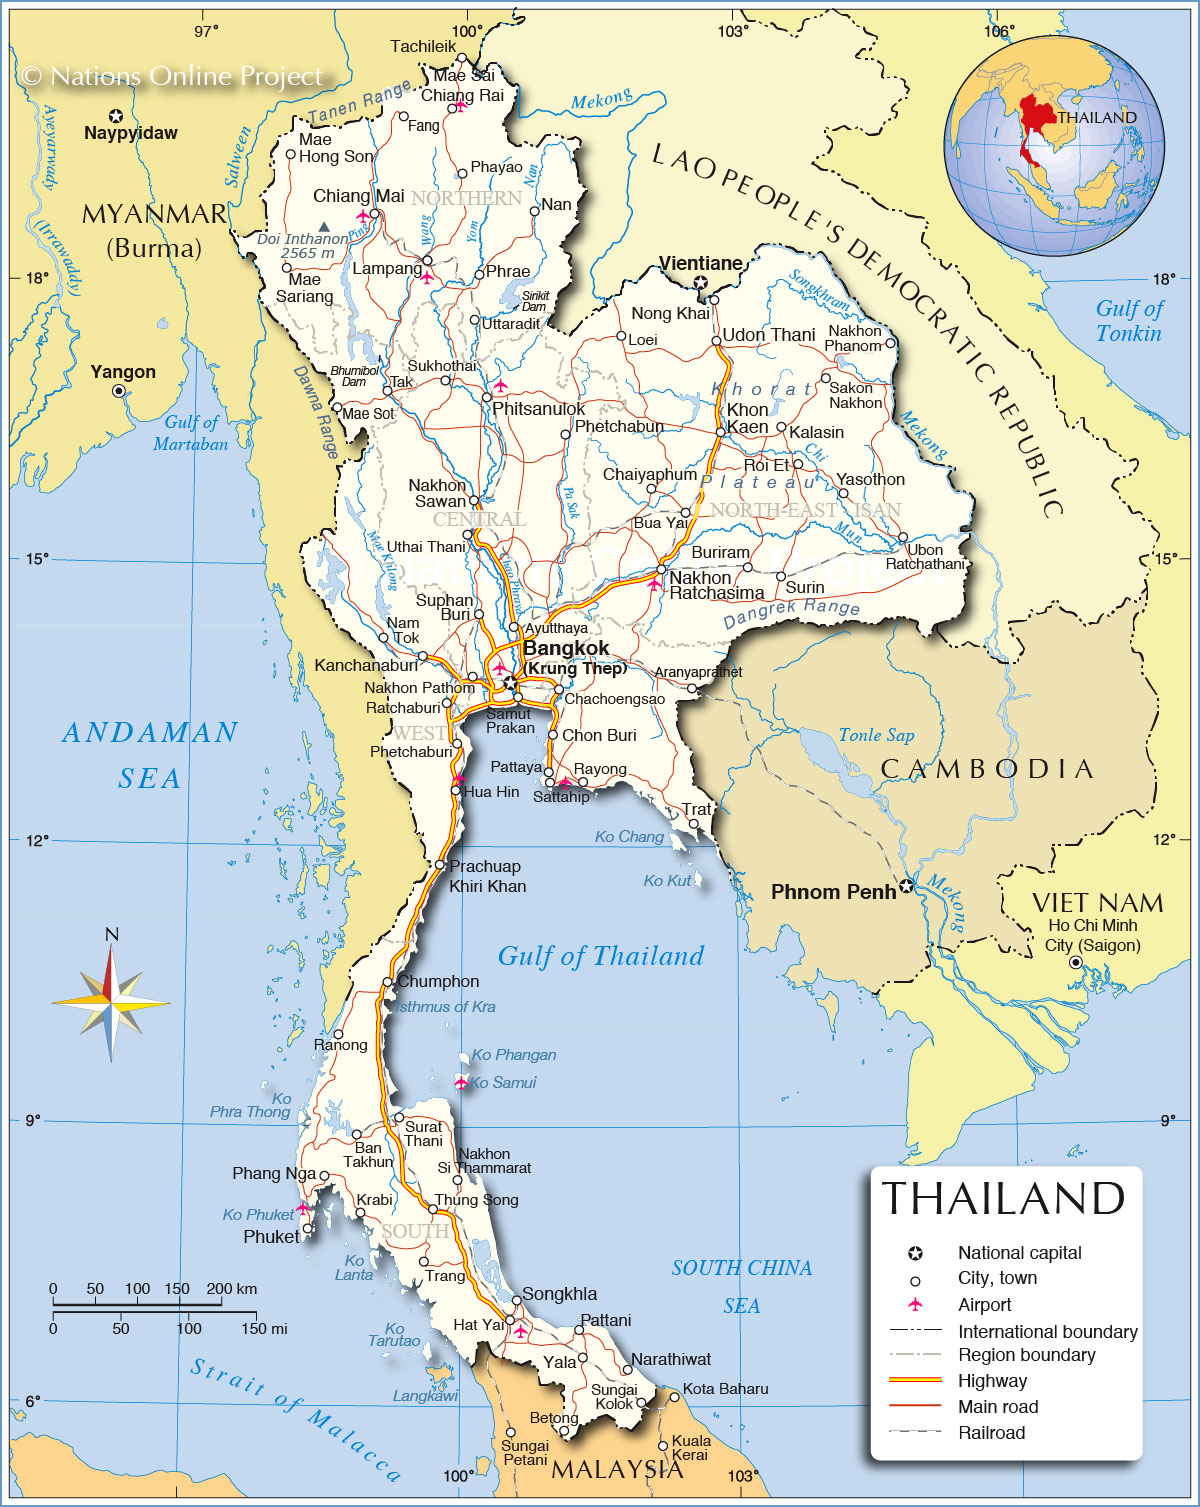 Regions Map Of Thailand Nations Online Project